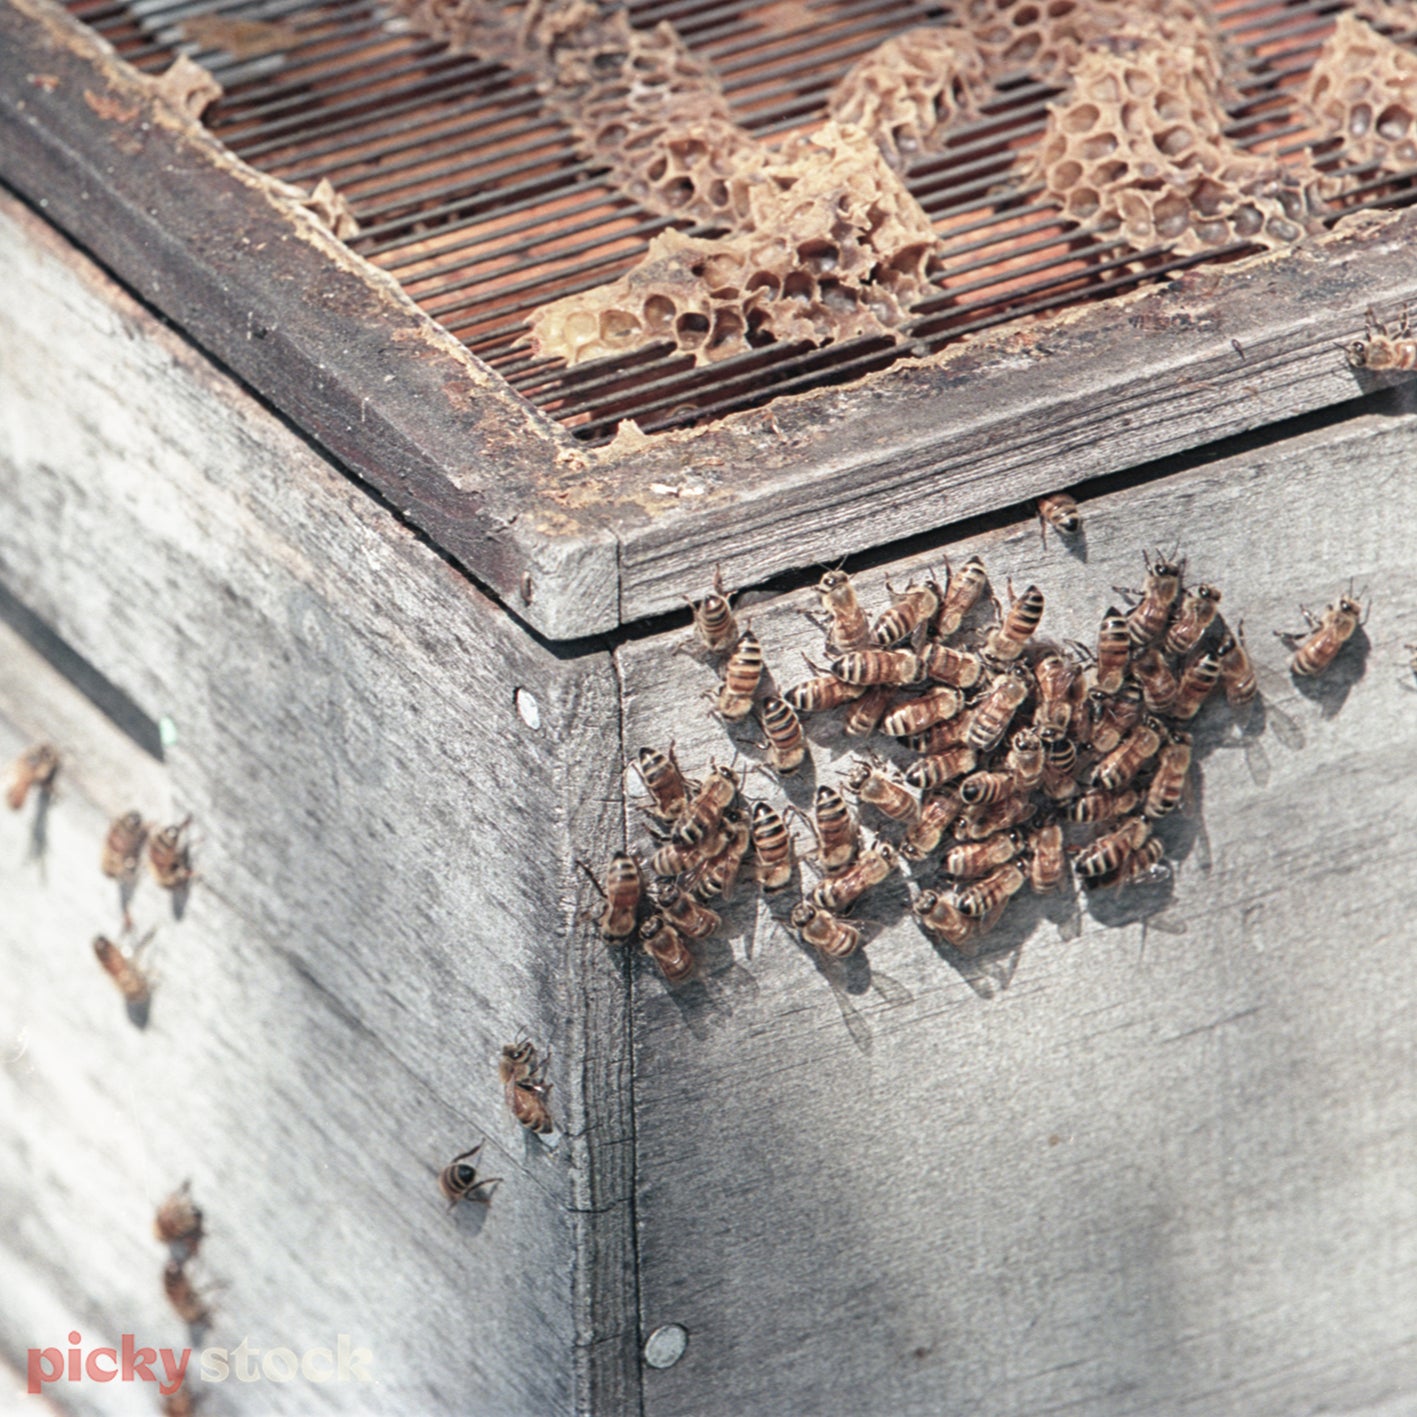 Close up shot of bees together sitting on side of wooden hive box. 